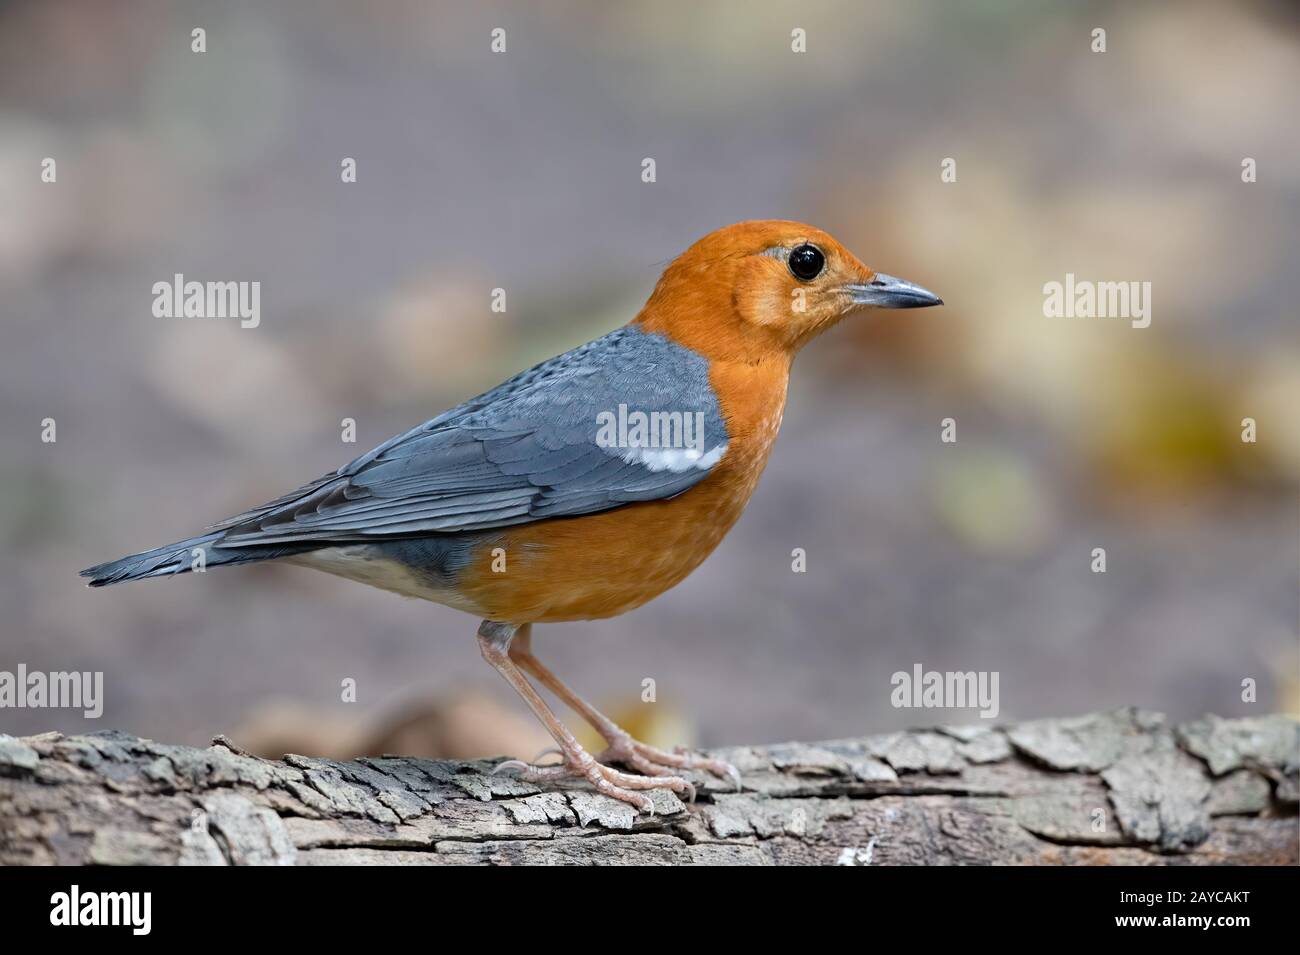 The orange-headed thrush (Geokichla citrina) is a bird in the thrush family. It is common in well-wooded areas of  Southeast Asia. Stock Photo